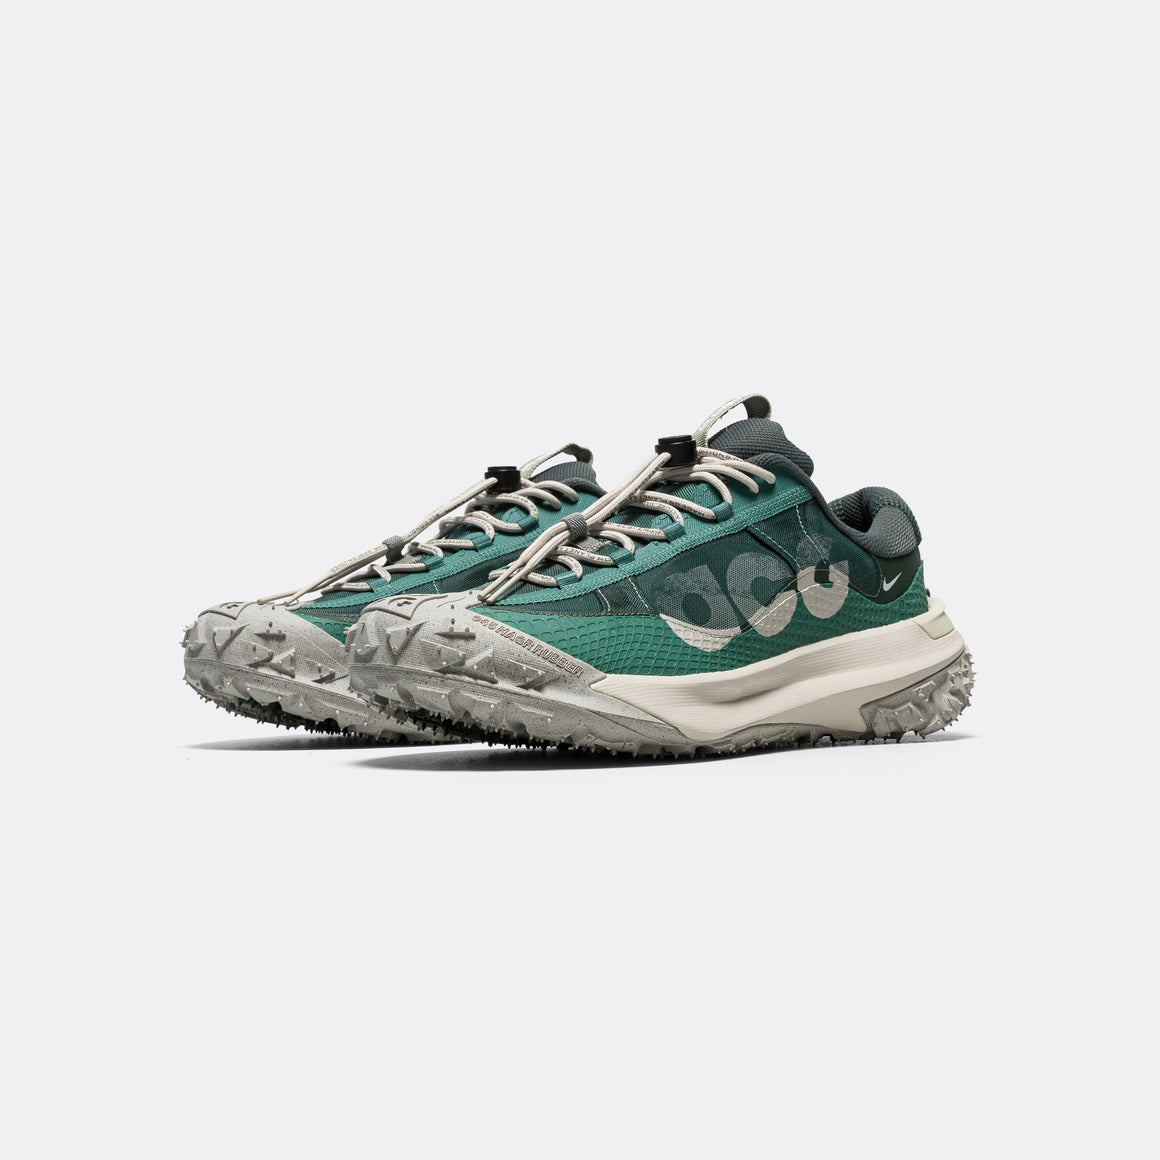 Nike ACG - Mountain Fly 2 Low - Bicoastal/Lt Orewood Brn-Vintage Green - UP THERE